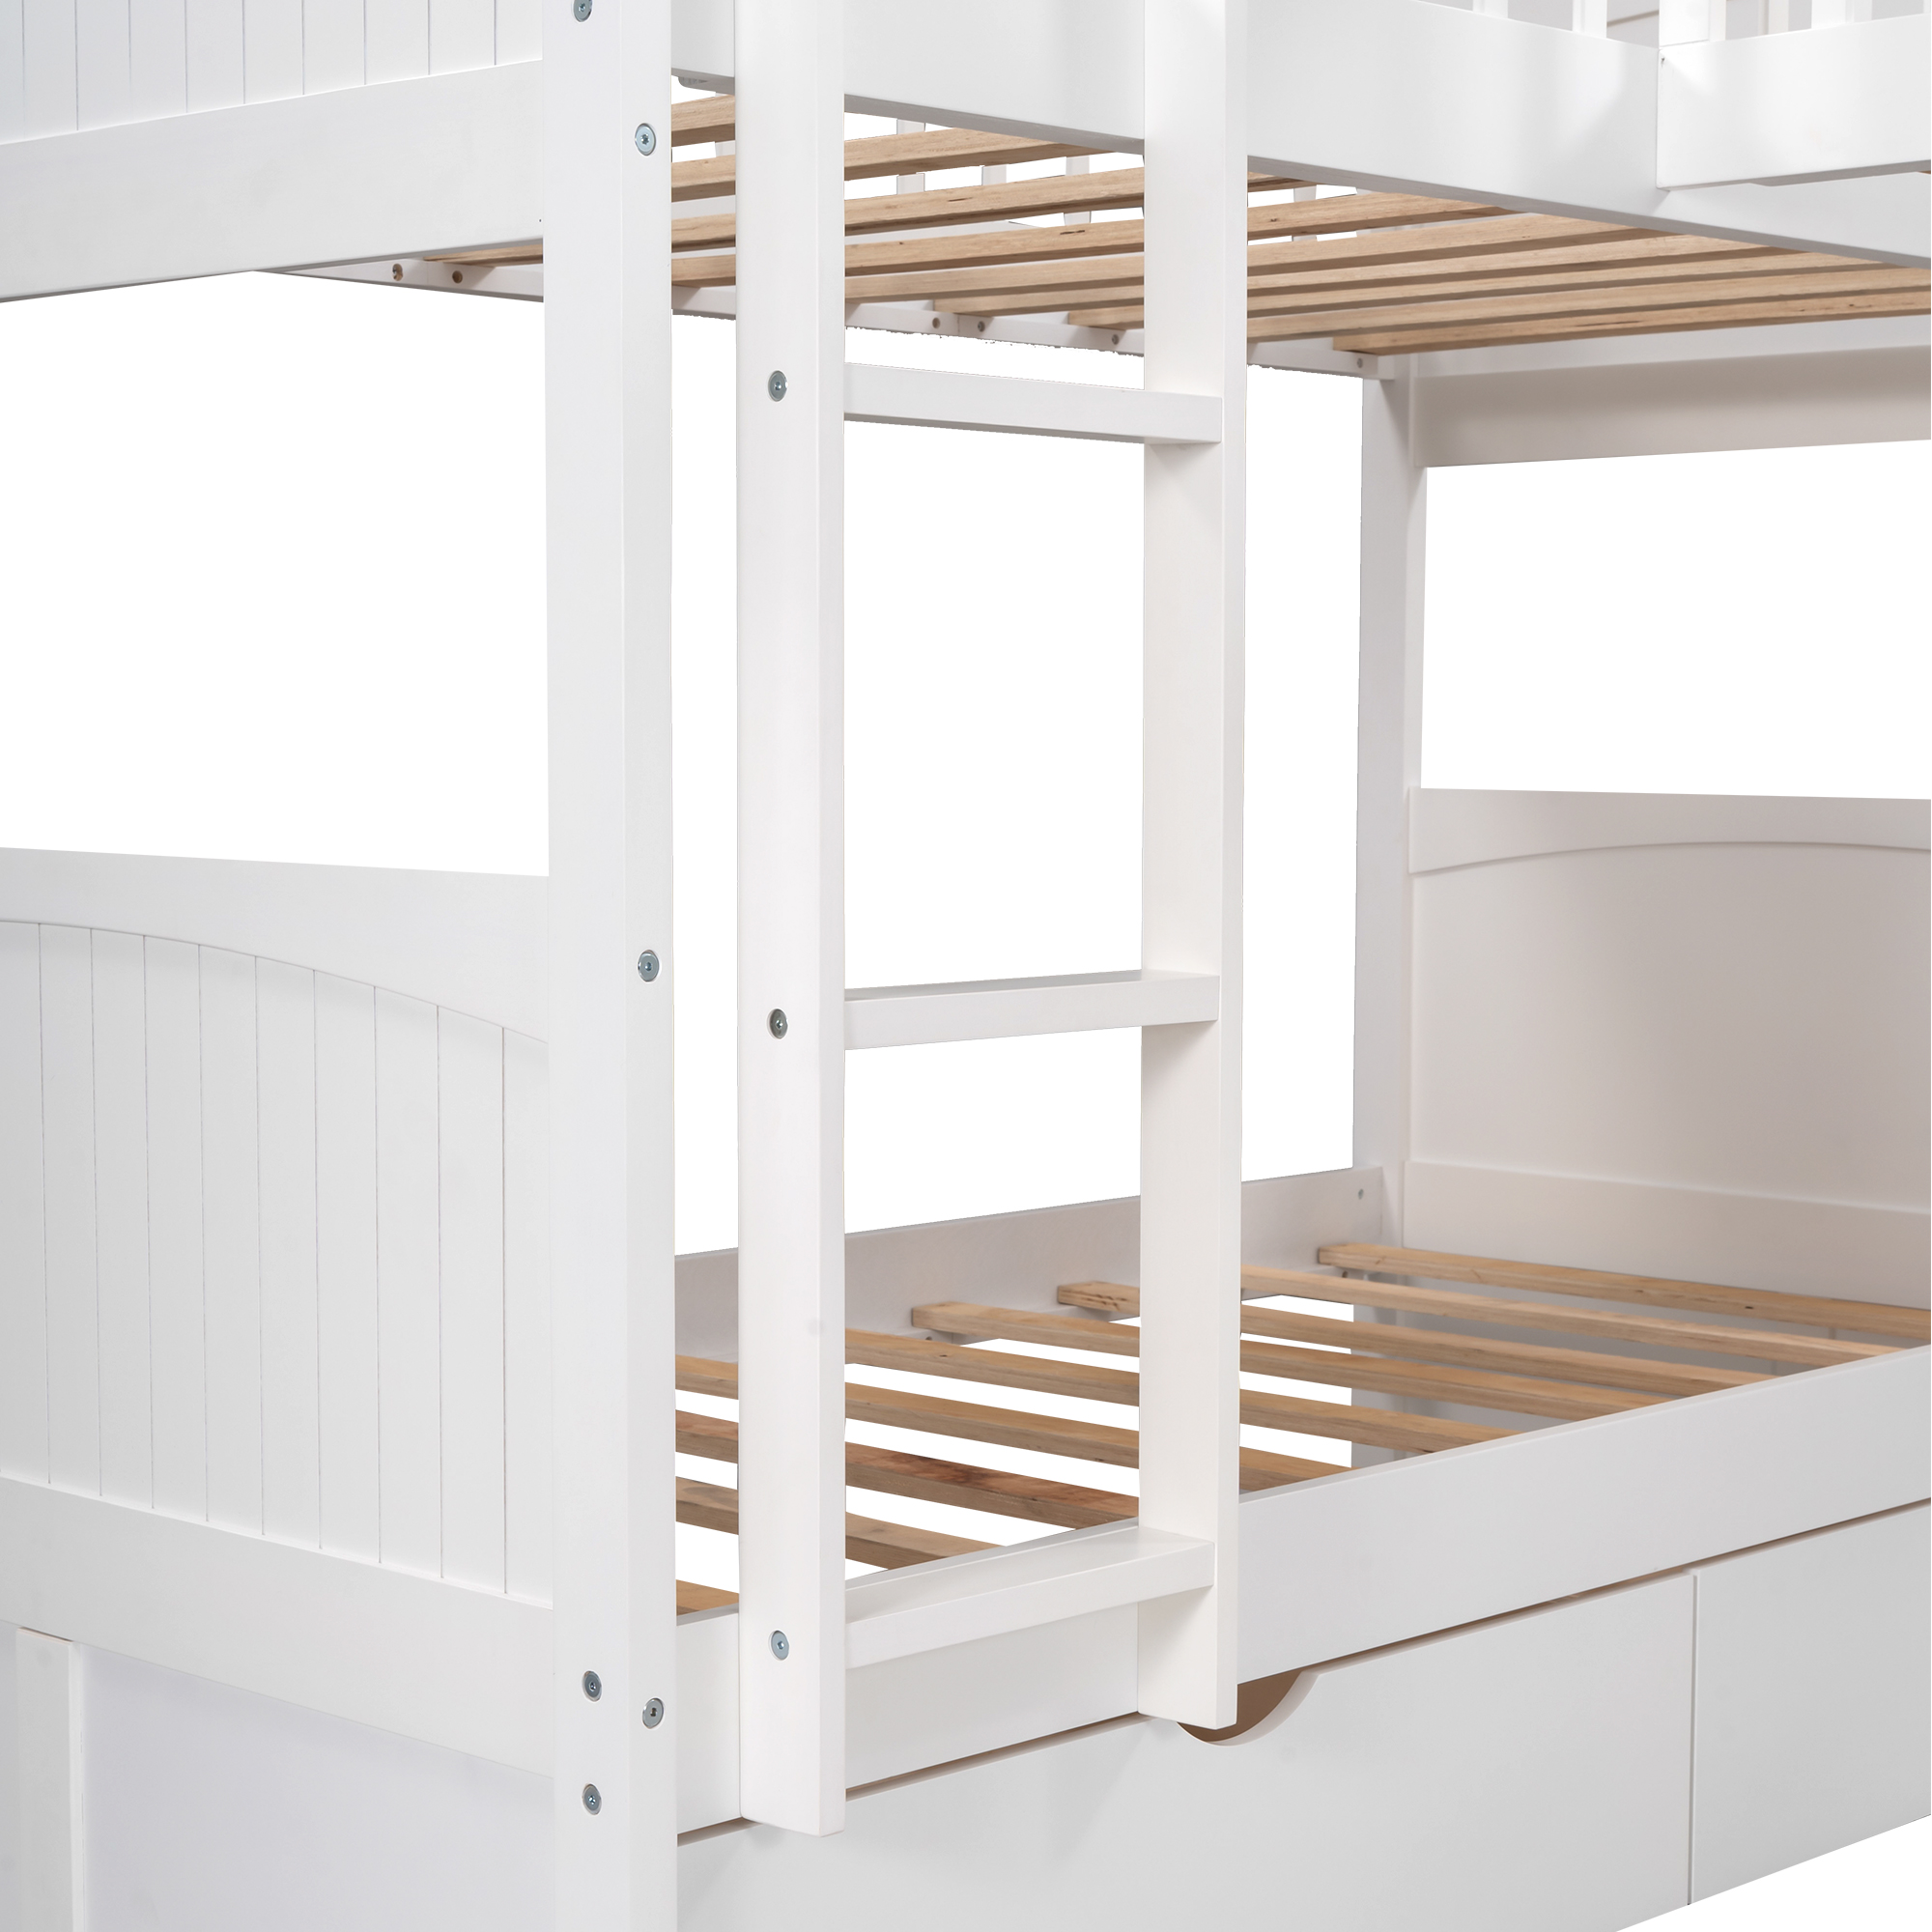 Euroco Wood Bunk Bed Storage, Twin-over-Twin-over-Twin for Children's Bedroom, White - image 10 of 12